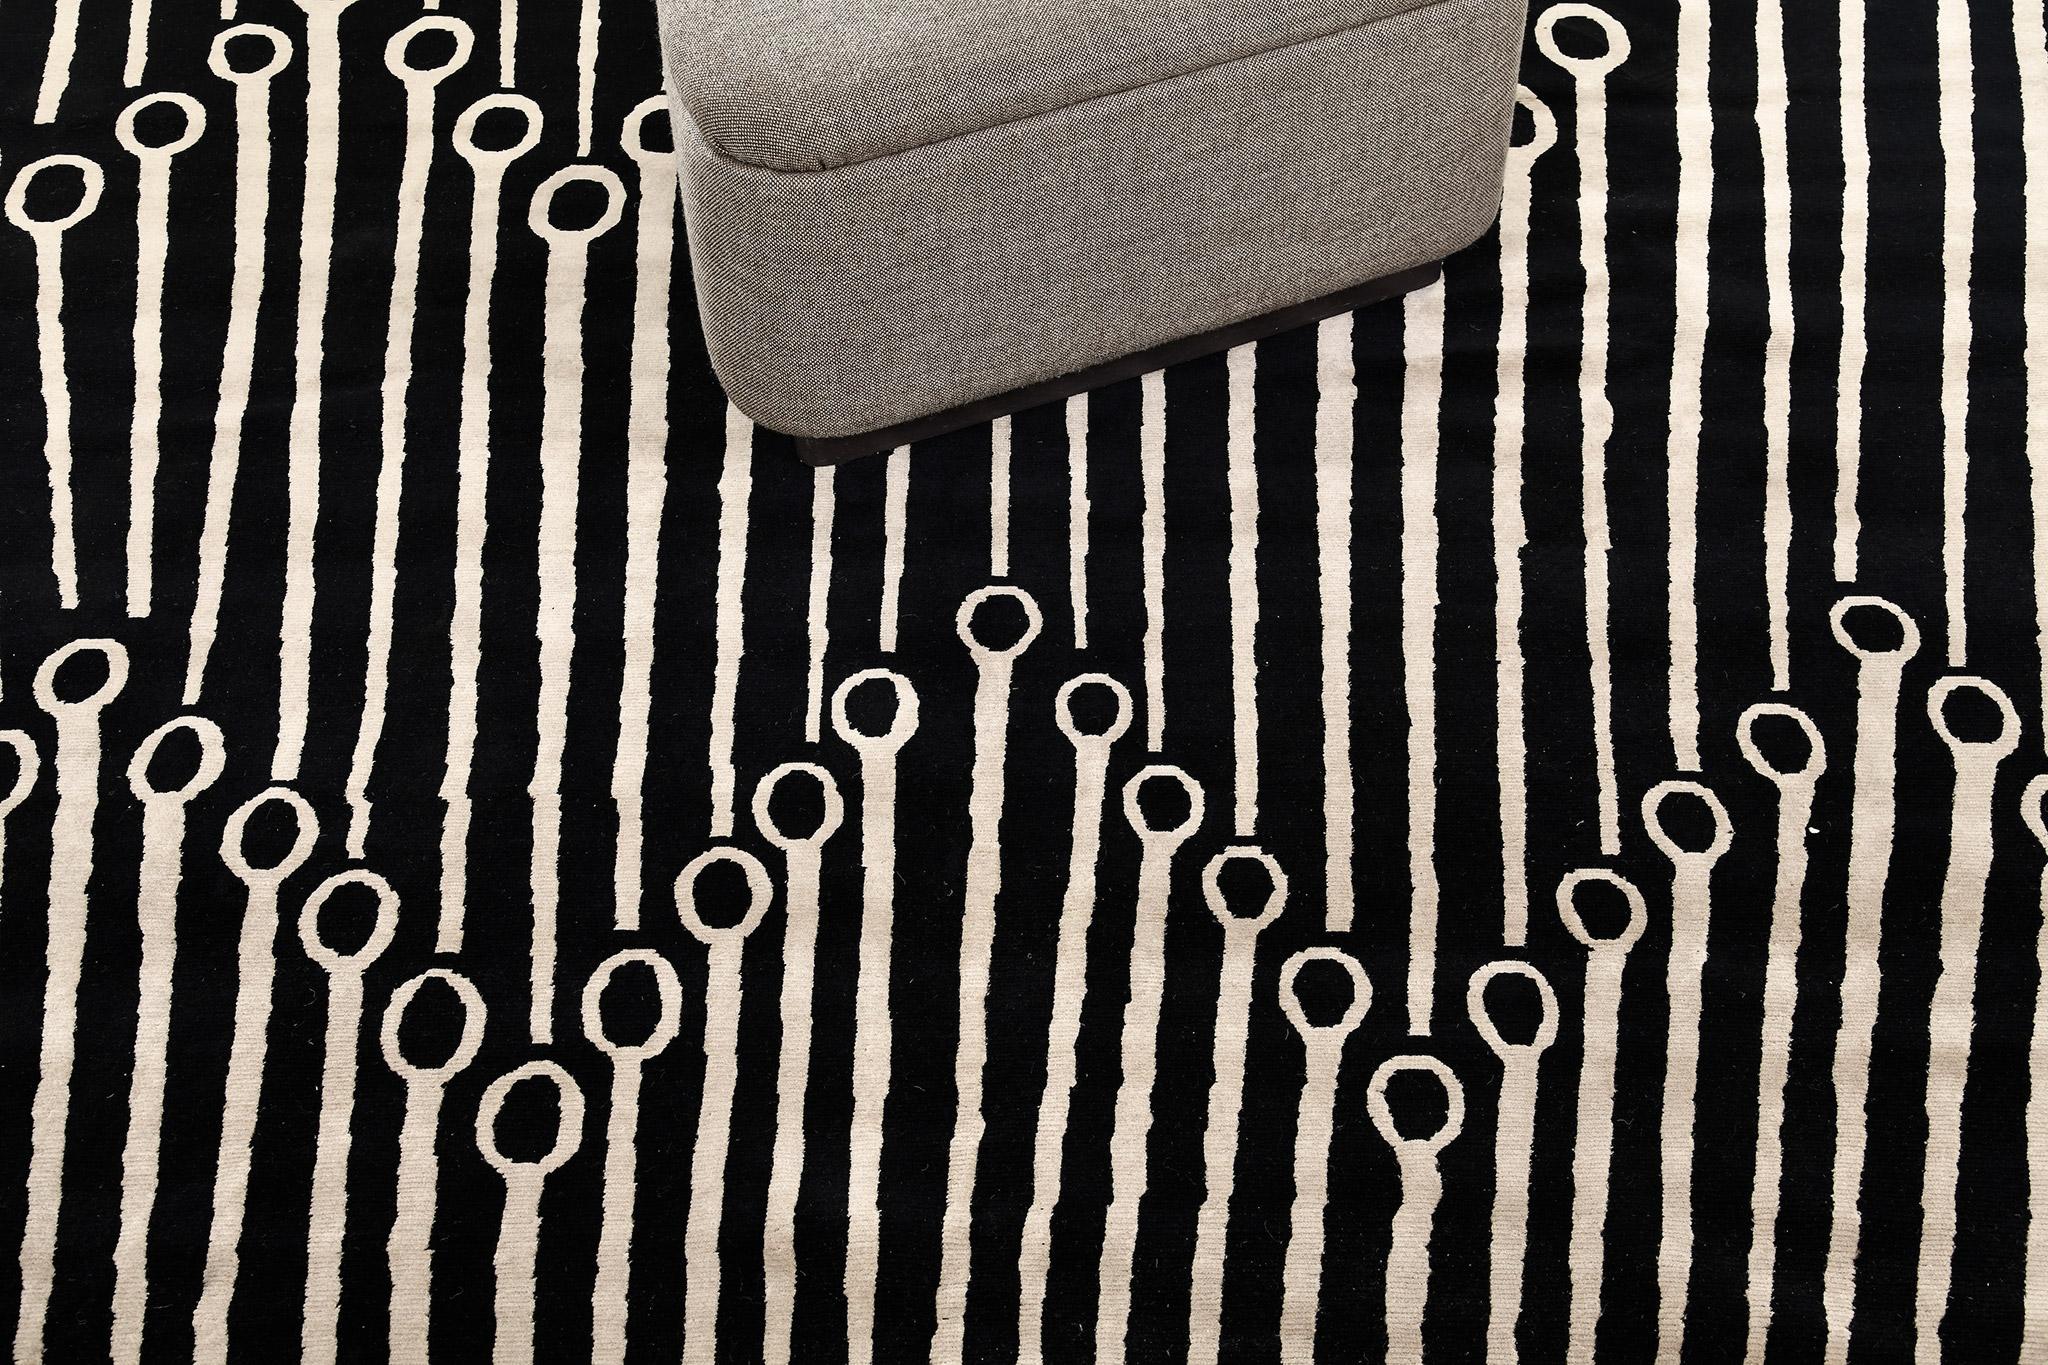 A monochromatic modern design rug that features vertical patterns that form a series of bold and solid zigzags motifs. This breathtaking rug adds a hint of playfulness to the room while maintaining its distinct vibe. A perfect centrepiece that will